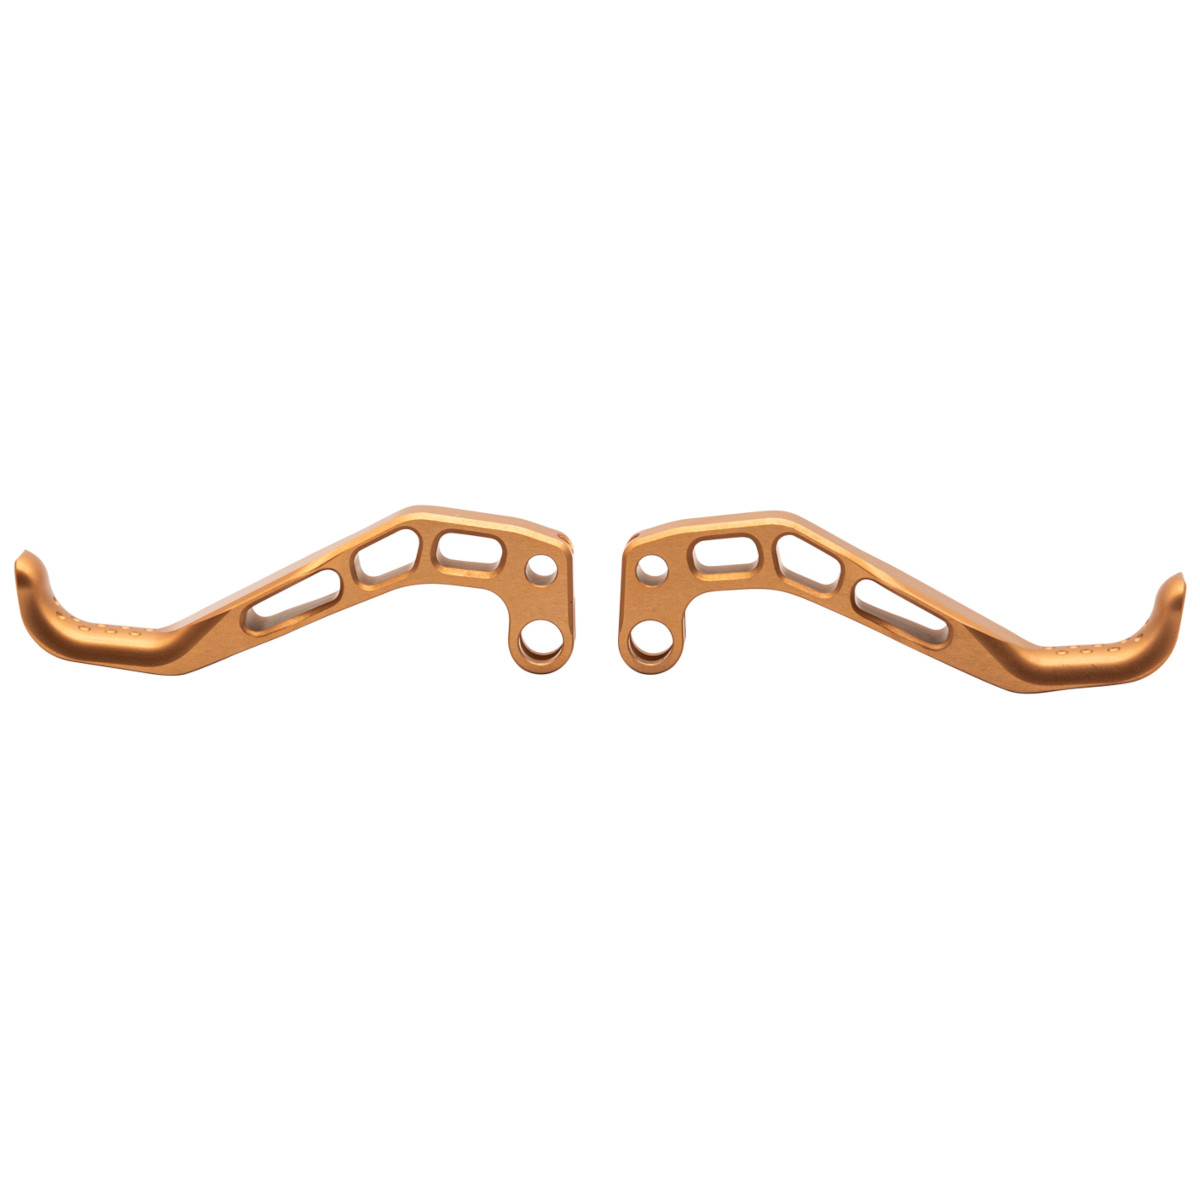 Picture of OAK Components TRL Brakelever Set - TRP - copper